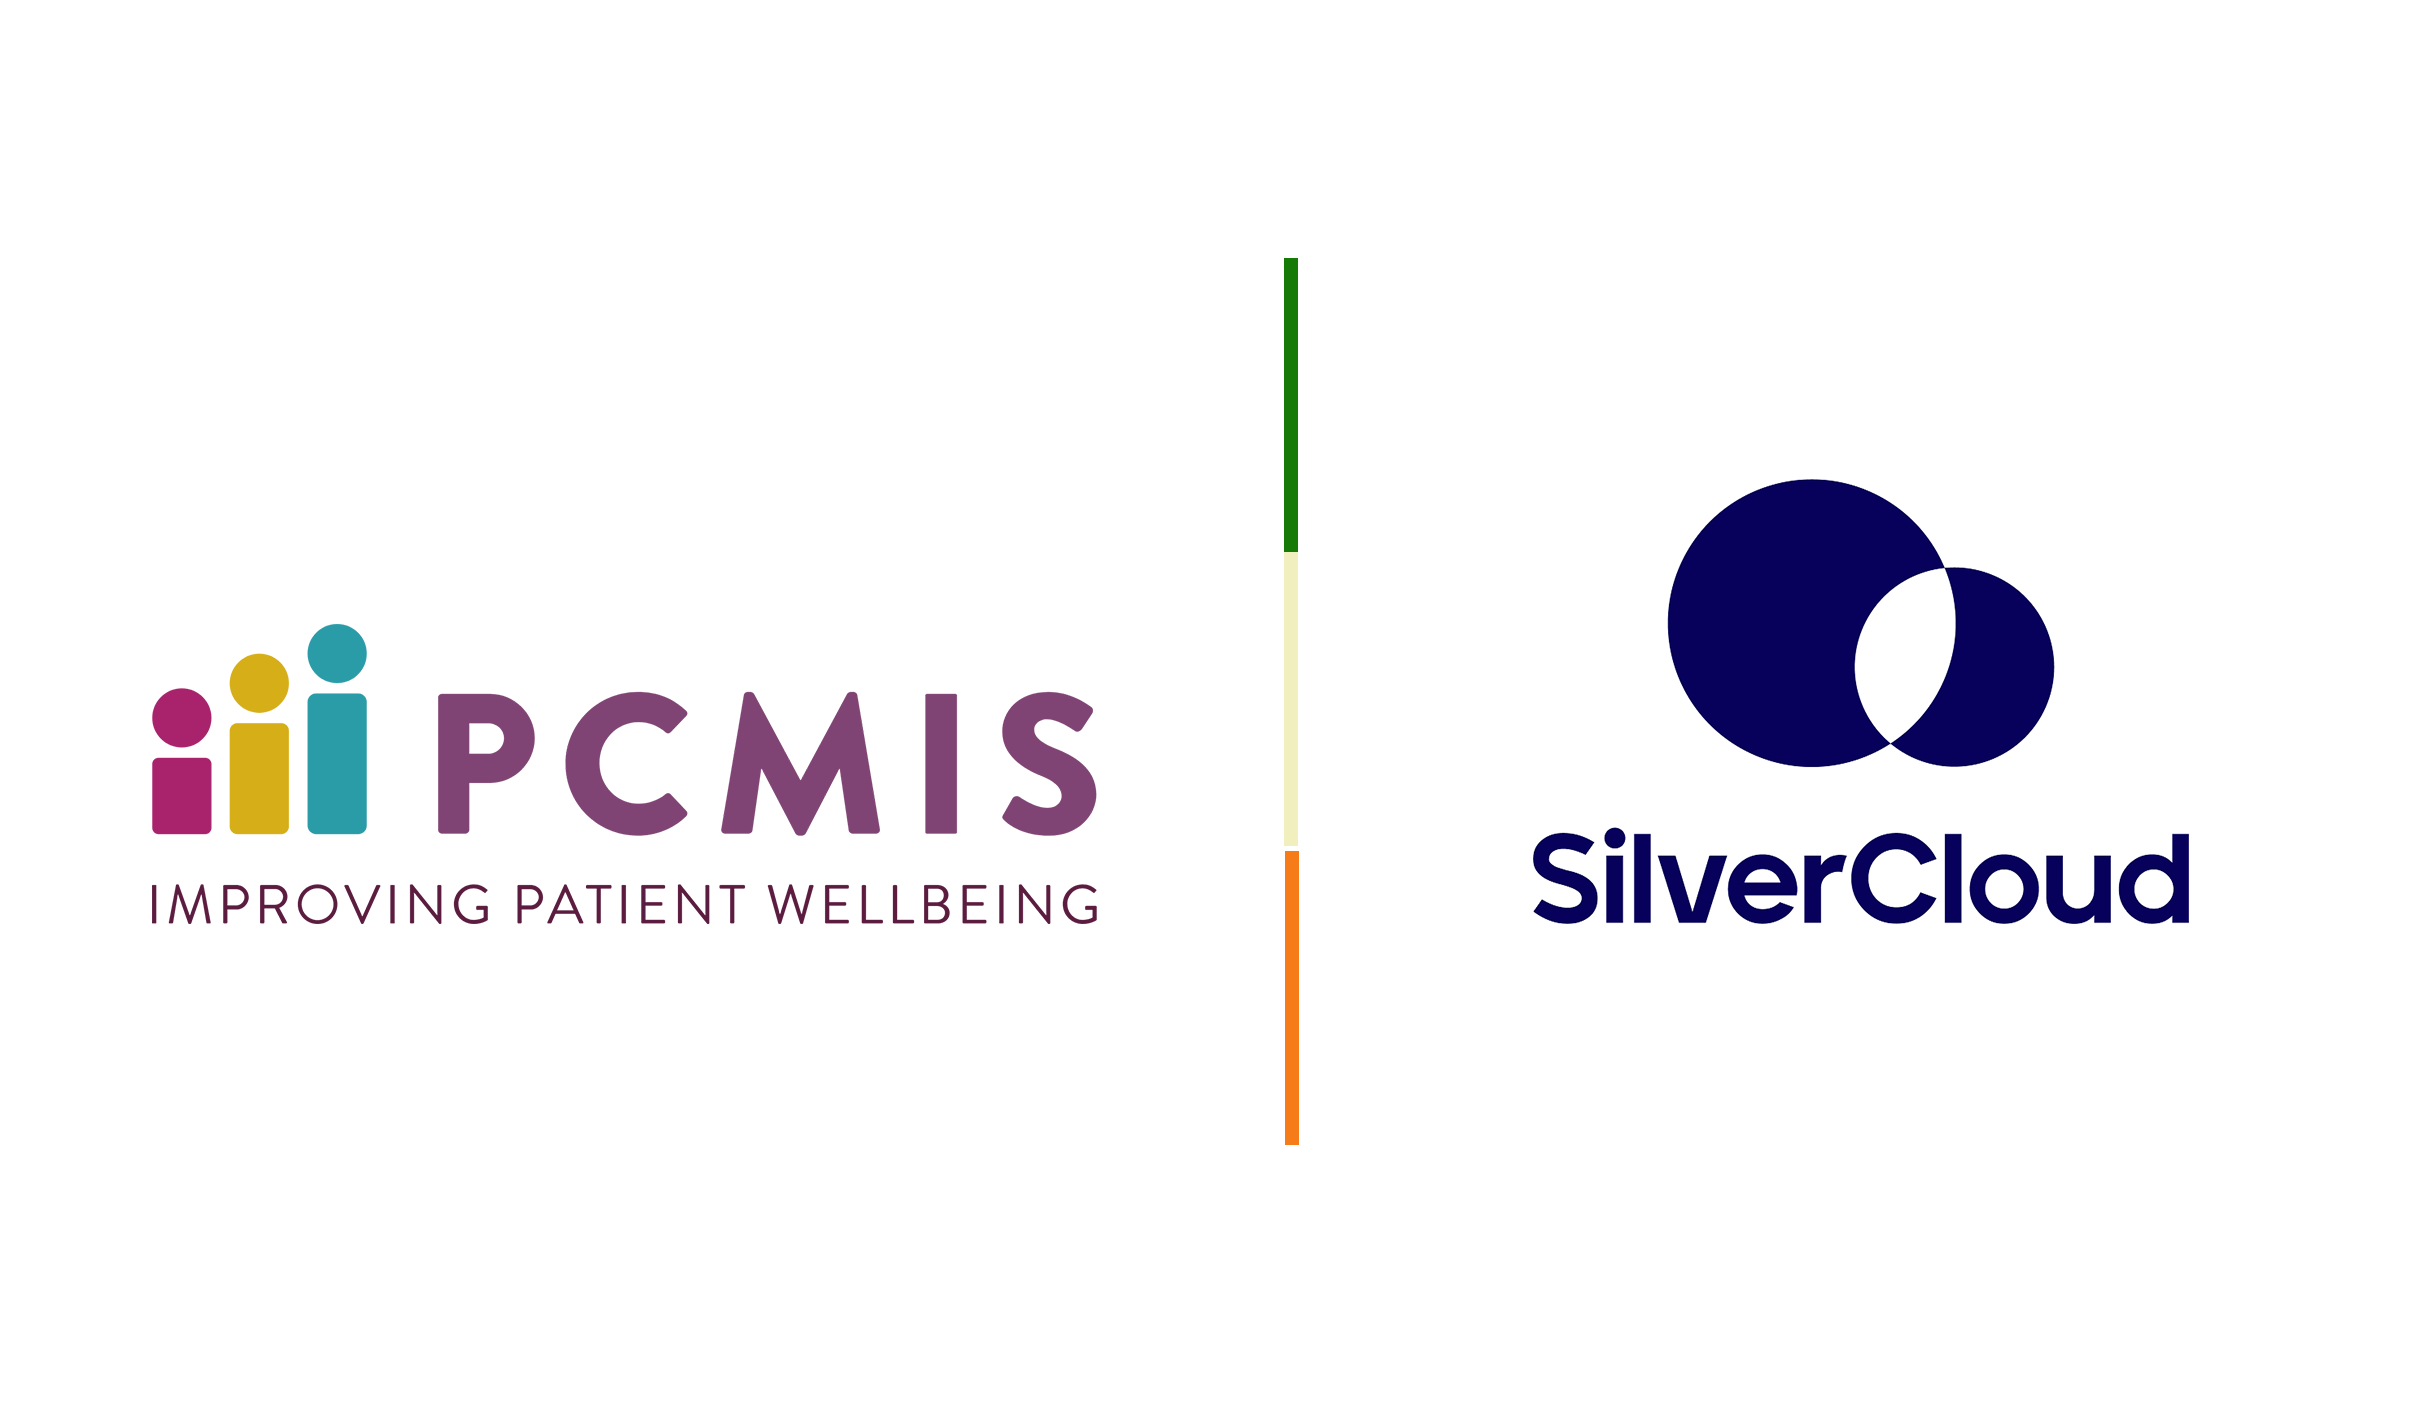 PCMIS and SilverCloud Ireland